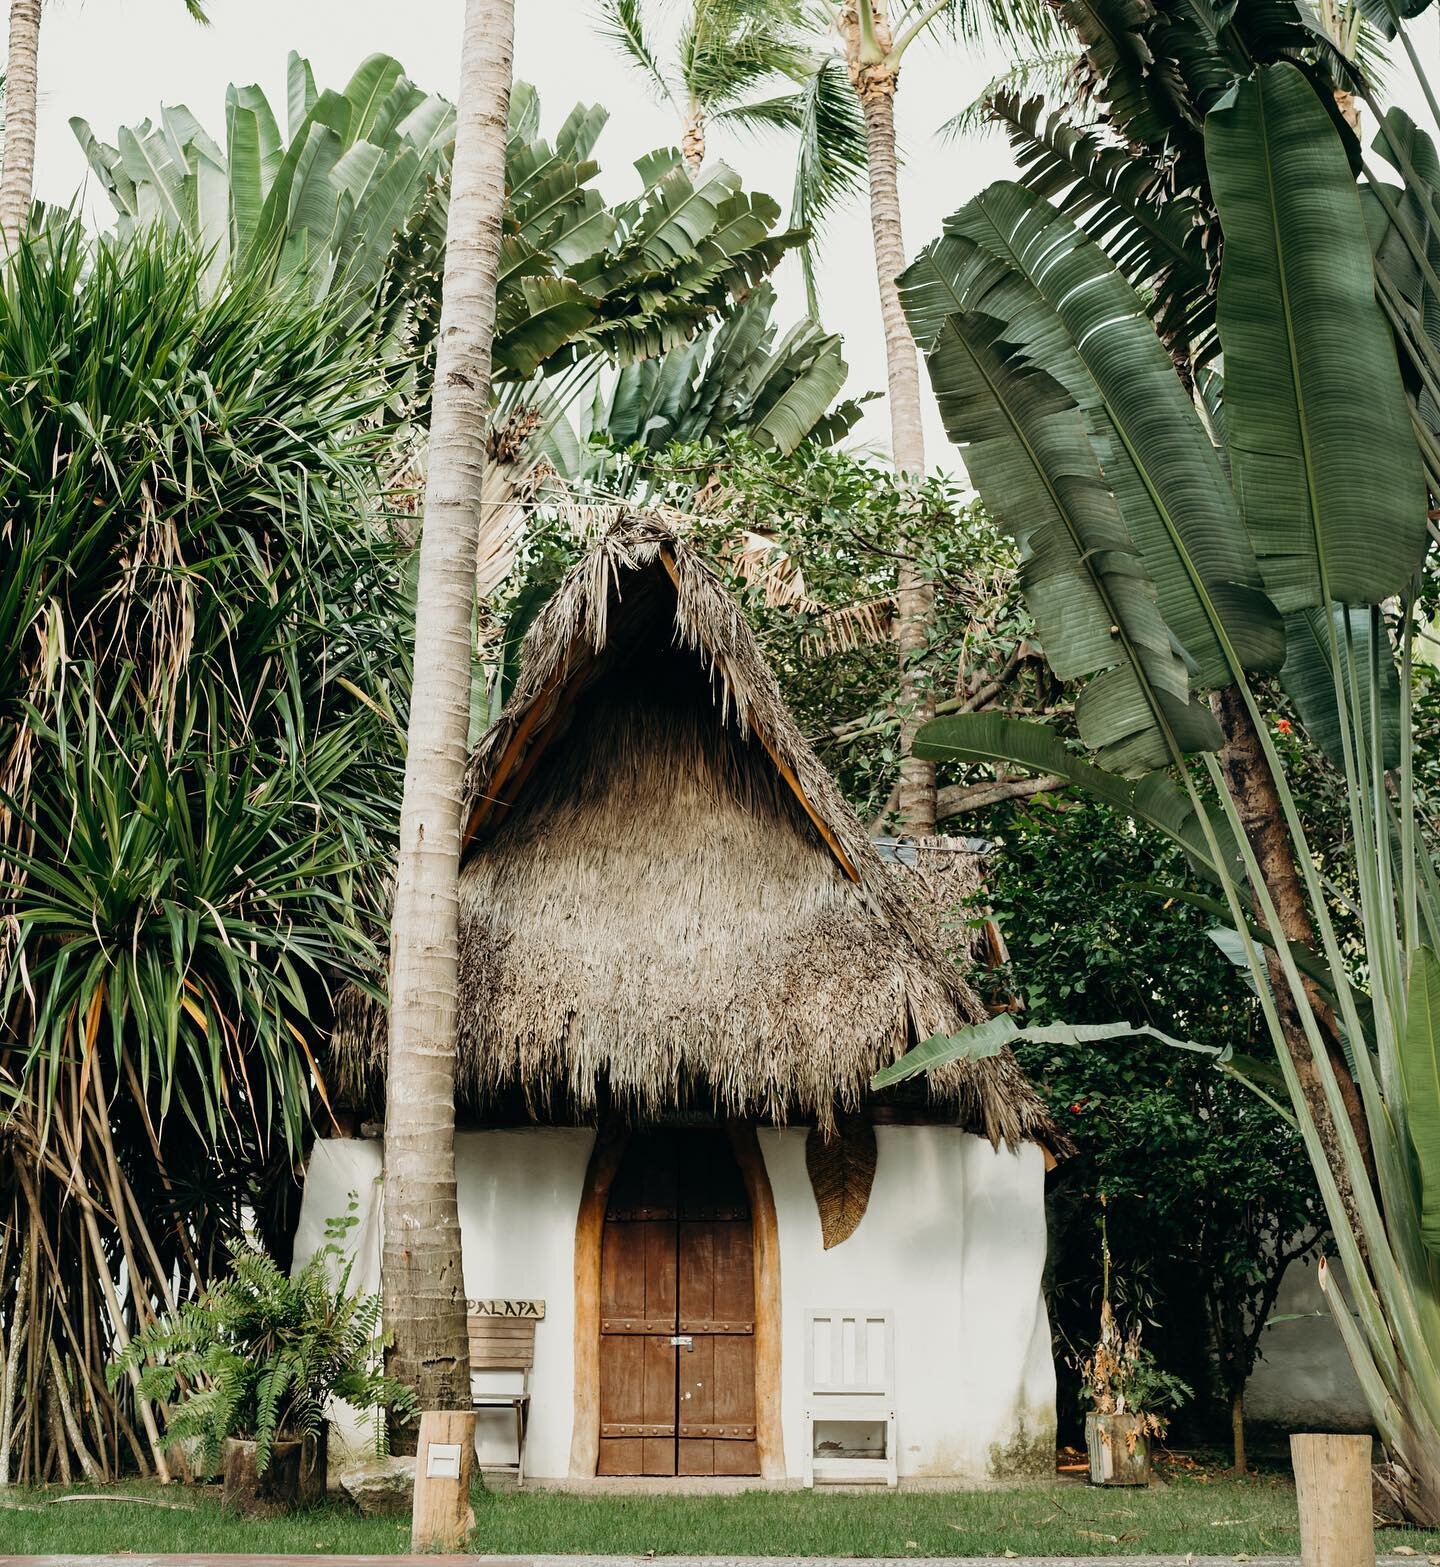 &ldquo;La Palapa&rdquo; is located in the heart of Frente al Punto. A charming and peaceful caba&ntilde;a where the bride (or groom) get ready before the big moment. 📸 by @annettefin.photos